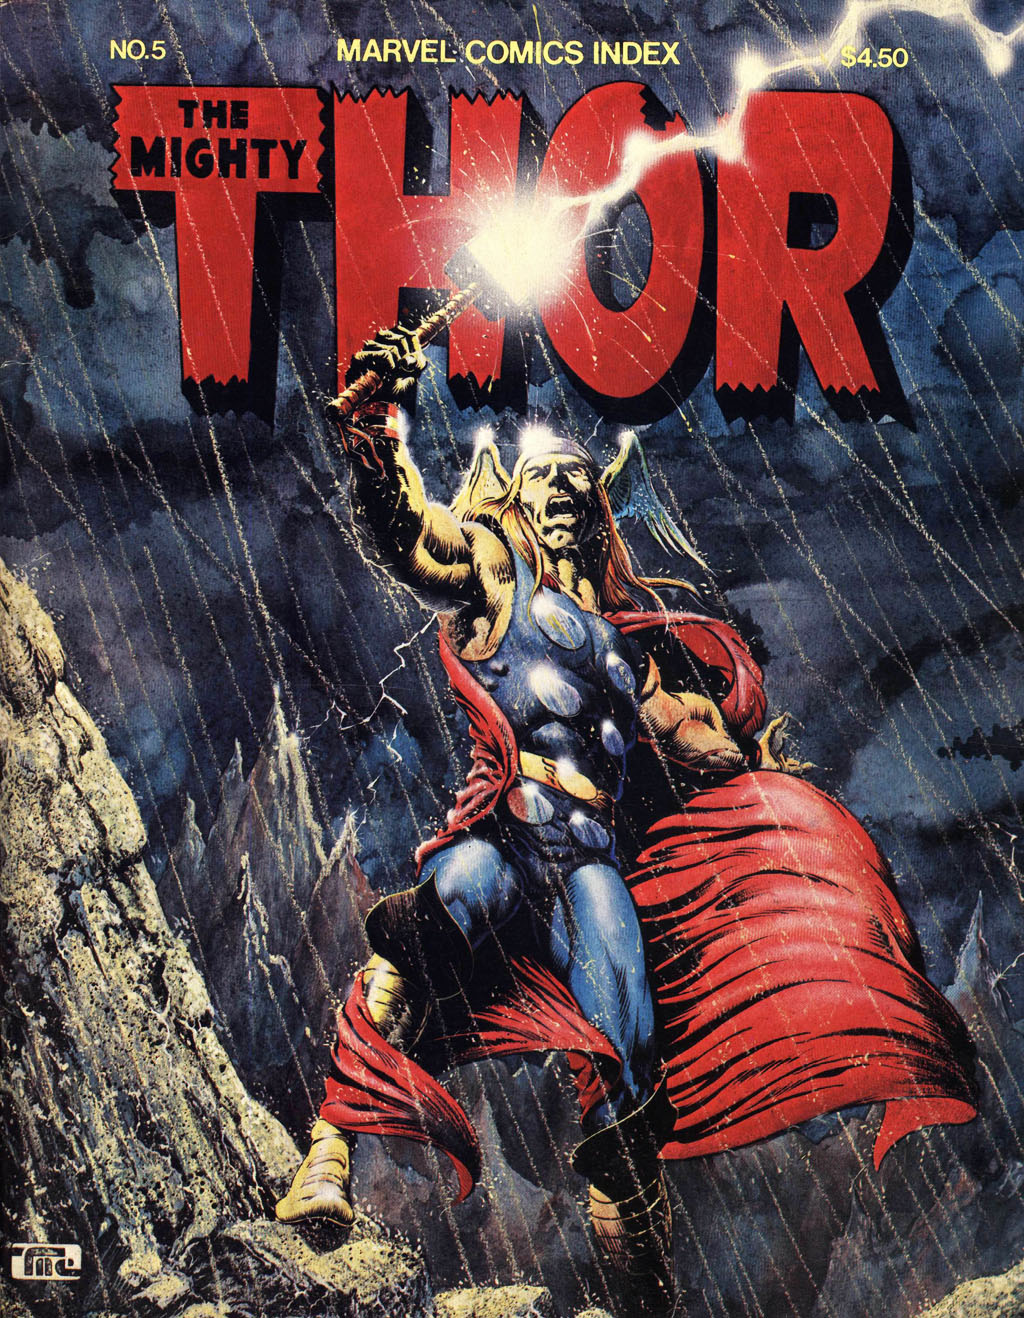 STARLOGGED - GEEK MEDIA AGAIN: MARVEL COMICS INDEX ISSUE 5: THE MIGHTY THOR